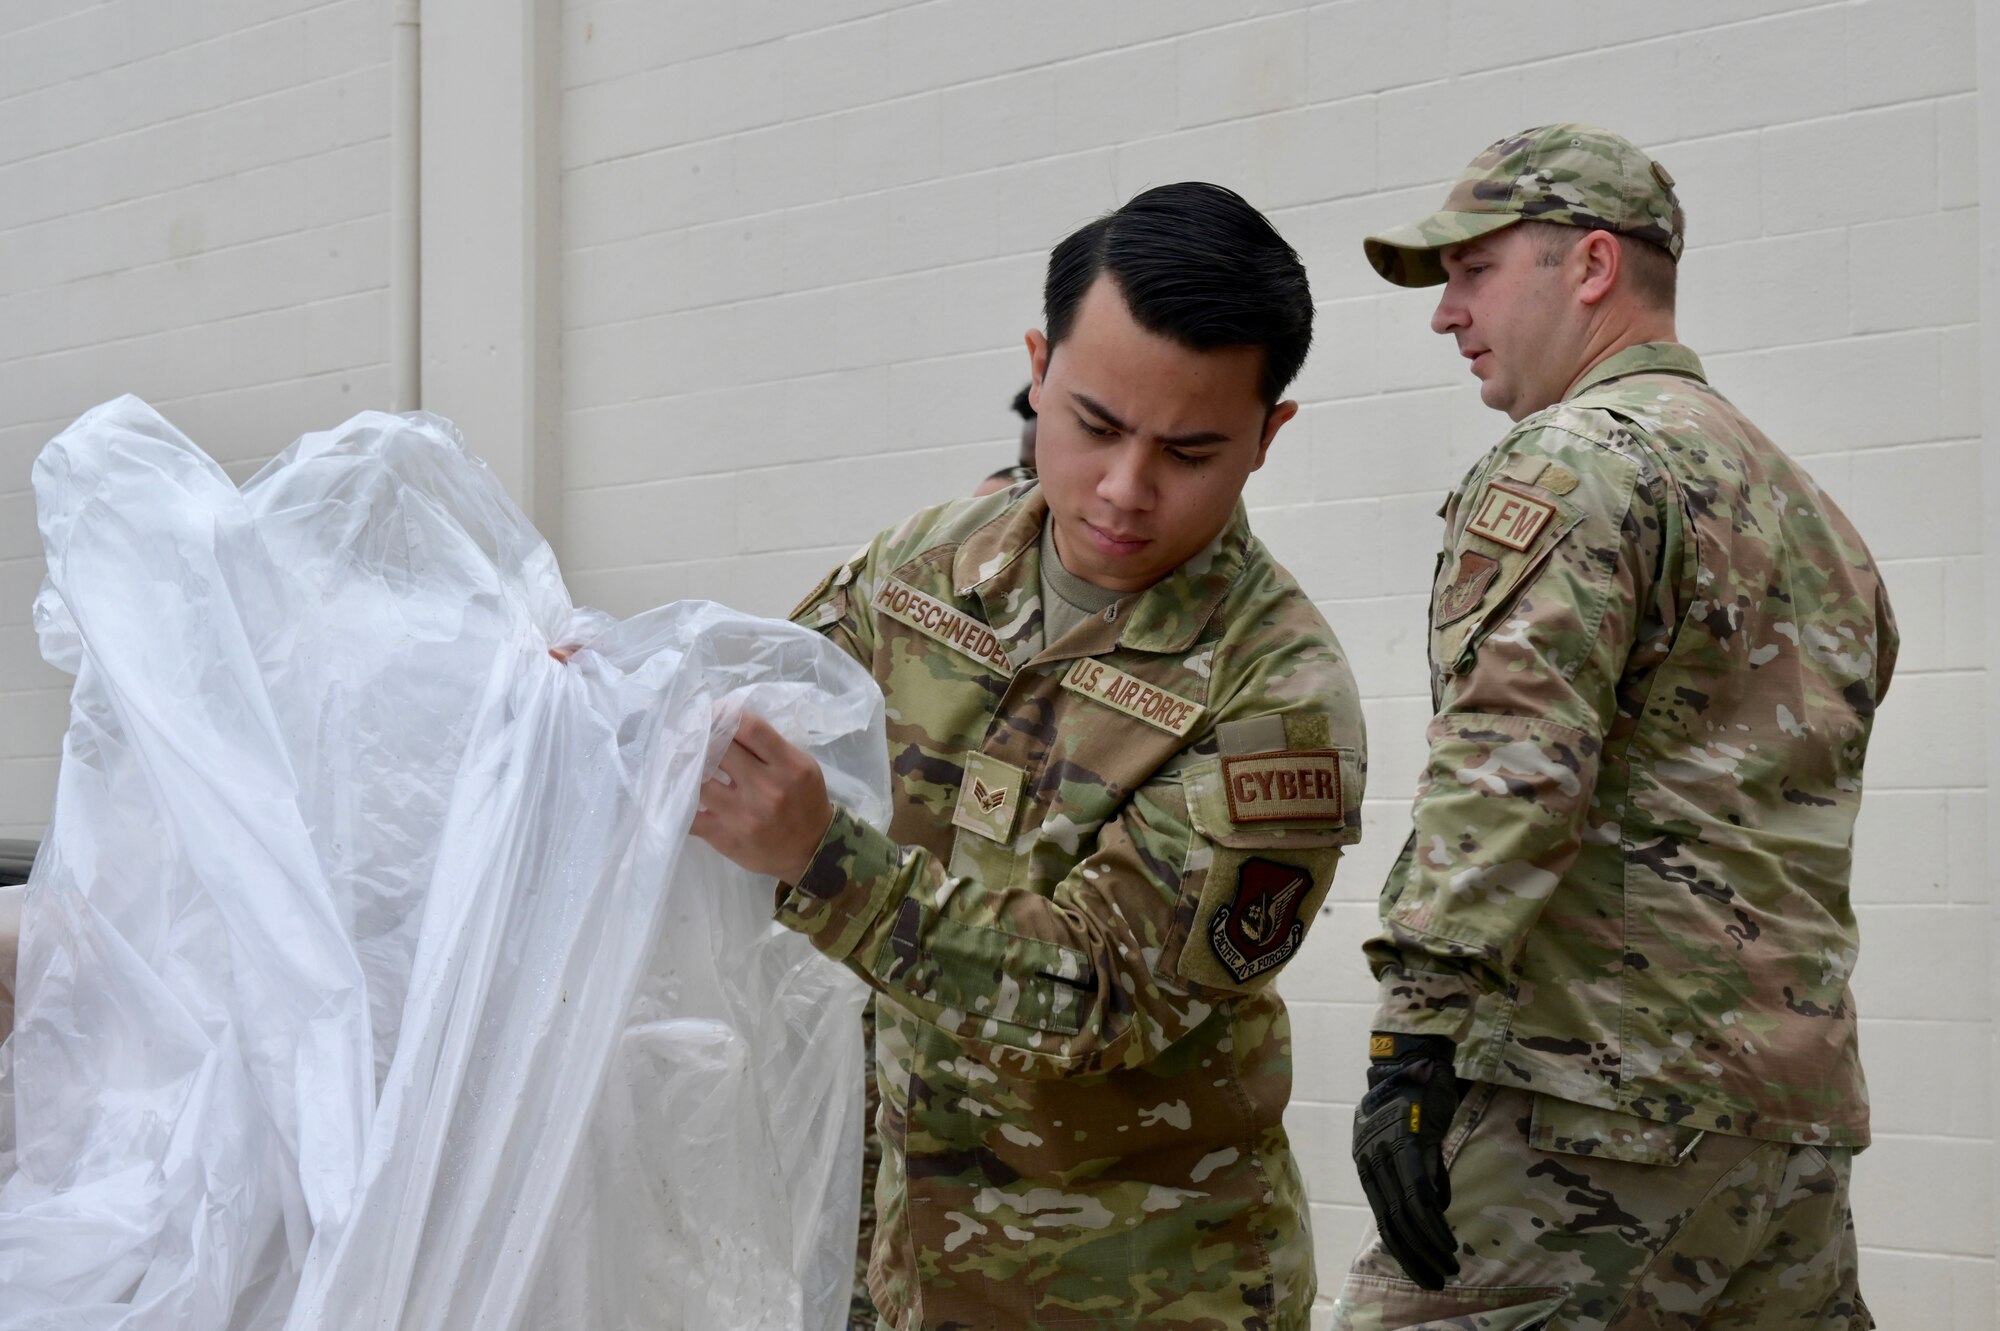 Senior Airman Edric Marco Hofschneider, 747th Cyberspace Squadron command and control defensive operator, helps to wrap a simulated-cargo pallet during the 15th Wing’s Multi-Capable Airmen Tier 1 training event at Joint Base Pearl Harbor-Hickam, Hawaii, May 19, 2022. Tier 1 training provided Airmen with a baseline set of advanced expeditionary training tasks that all MCA will receive. (U.S. Air Force photo by 1st Lt. Benjamin Aronson)